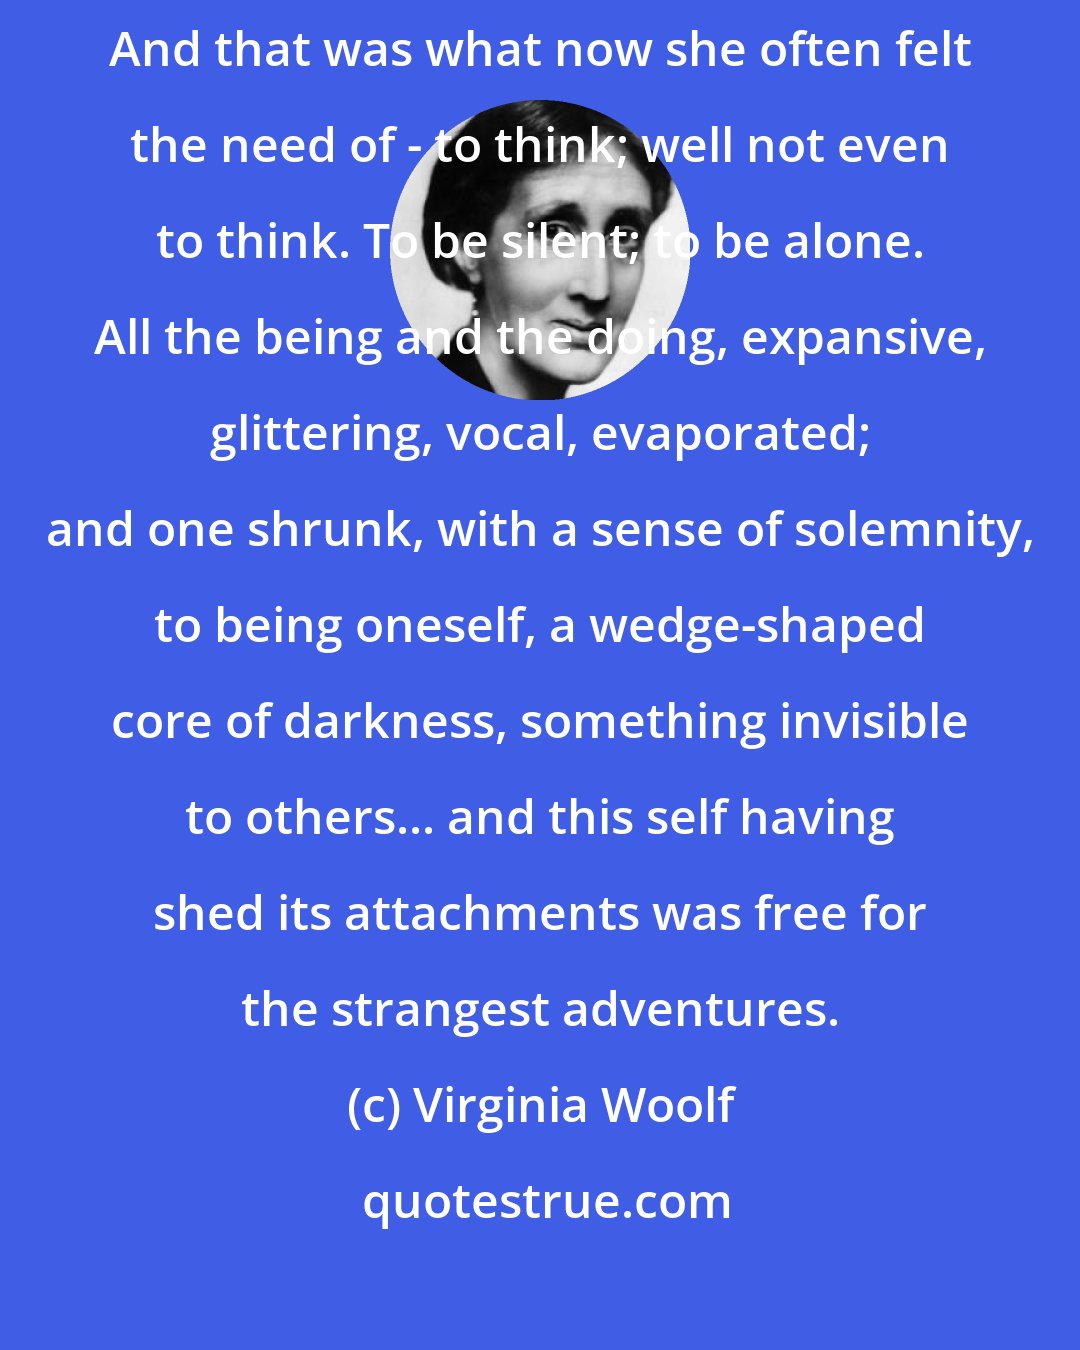 Virginia Woolf: For now she need not think of anybody. She coud be herself, by herself. And that was what now she often felt the need of - to think; well not even to think. To be silent; to be alone. All the being and the doing, expansive, glittering, vocal, evaporated; and one shrunk, with a sense of solemnity, to being oneself, a wedge-shaped core of darkness, something invisible to others... and this self having shed its attachments was free for the strangest adventures.